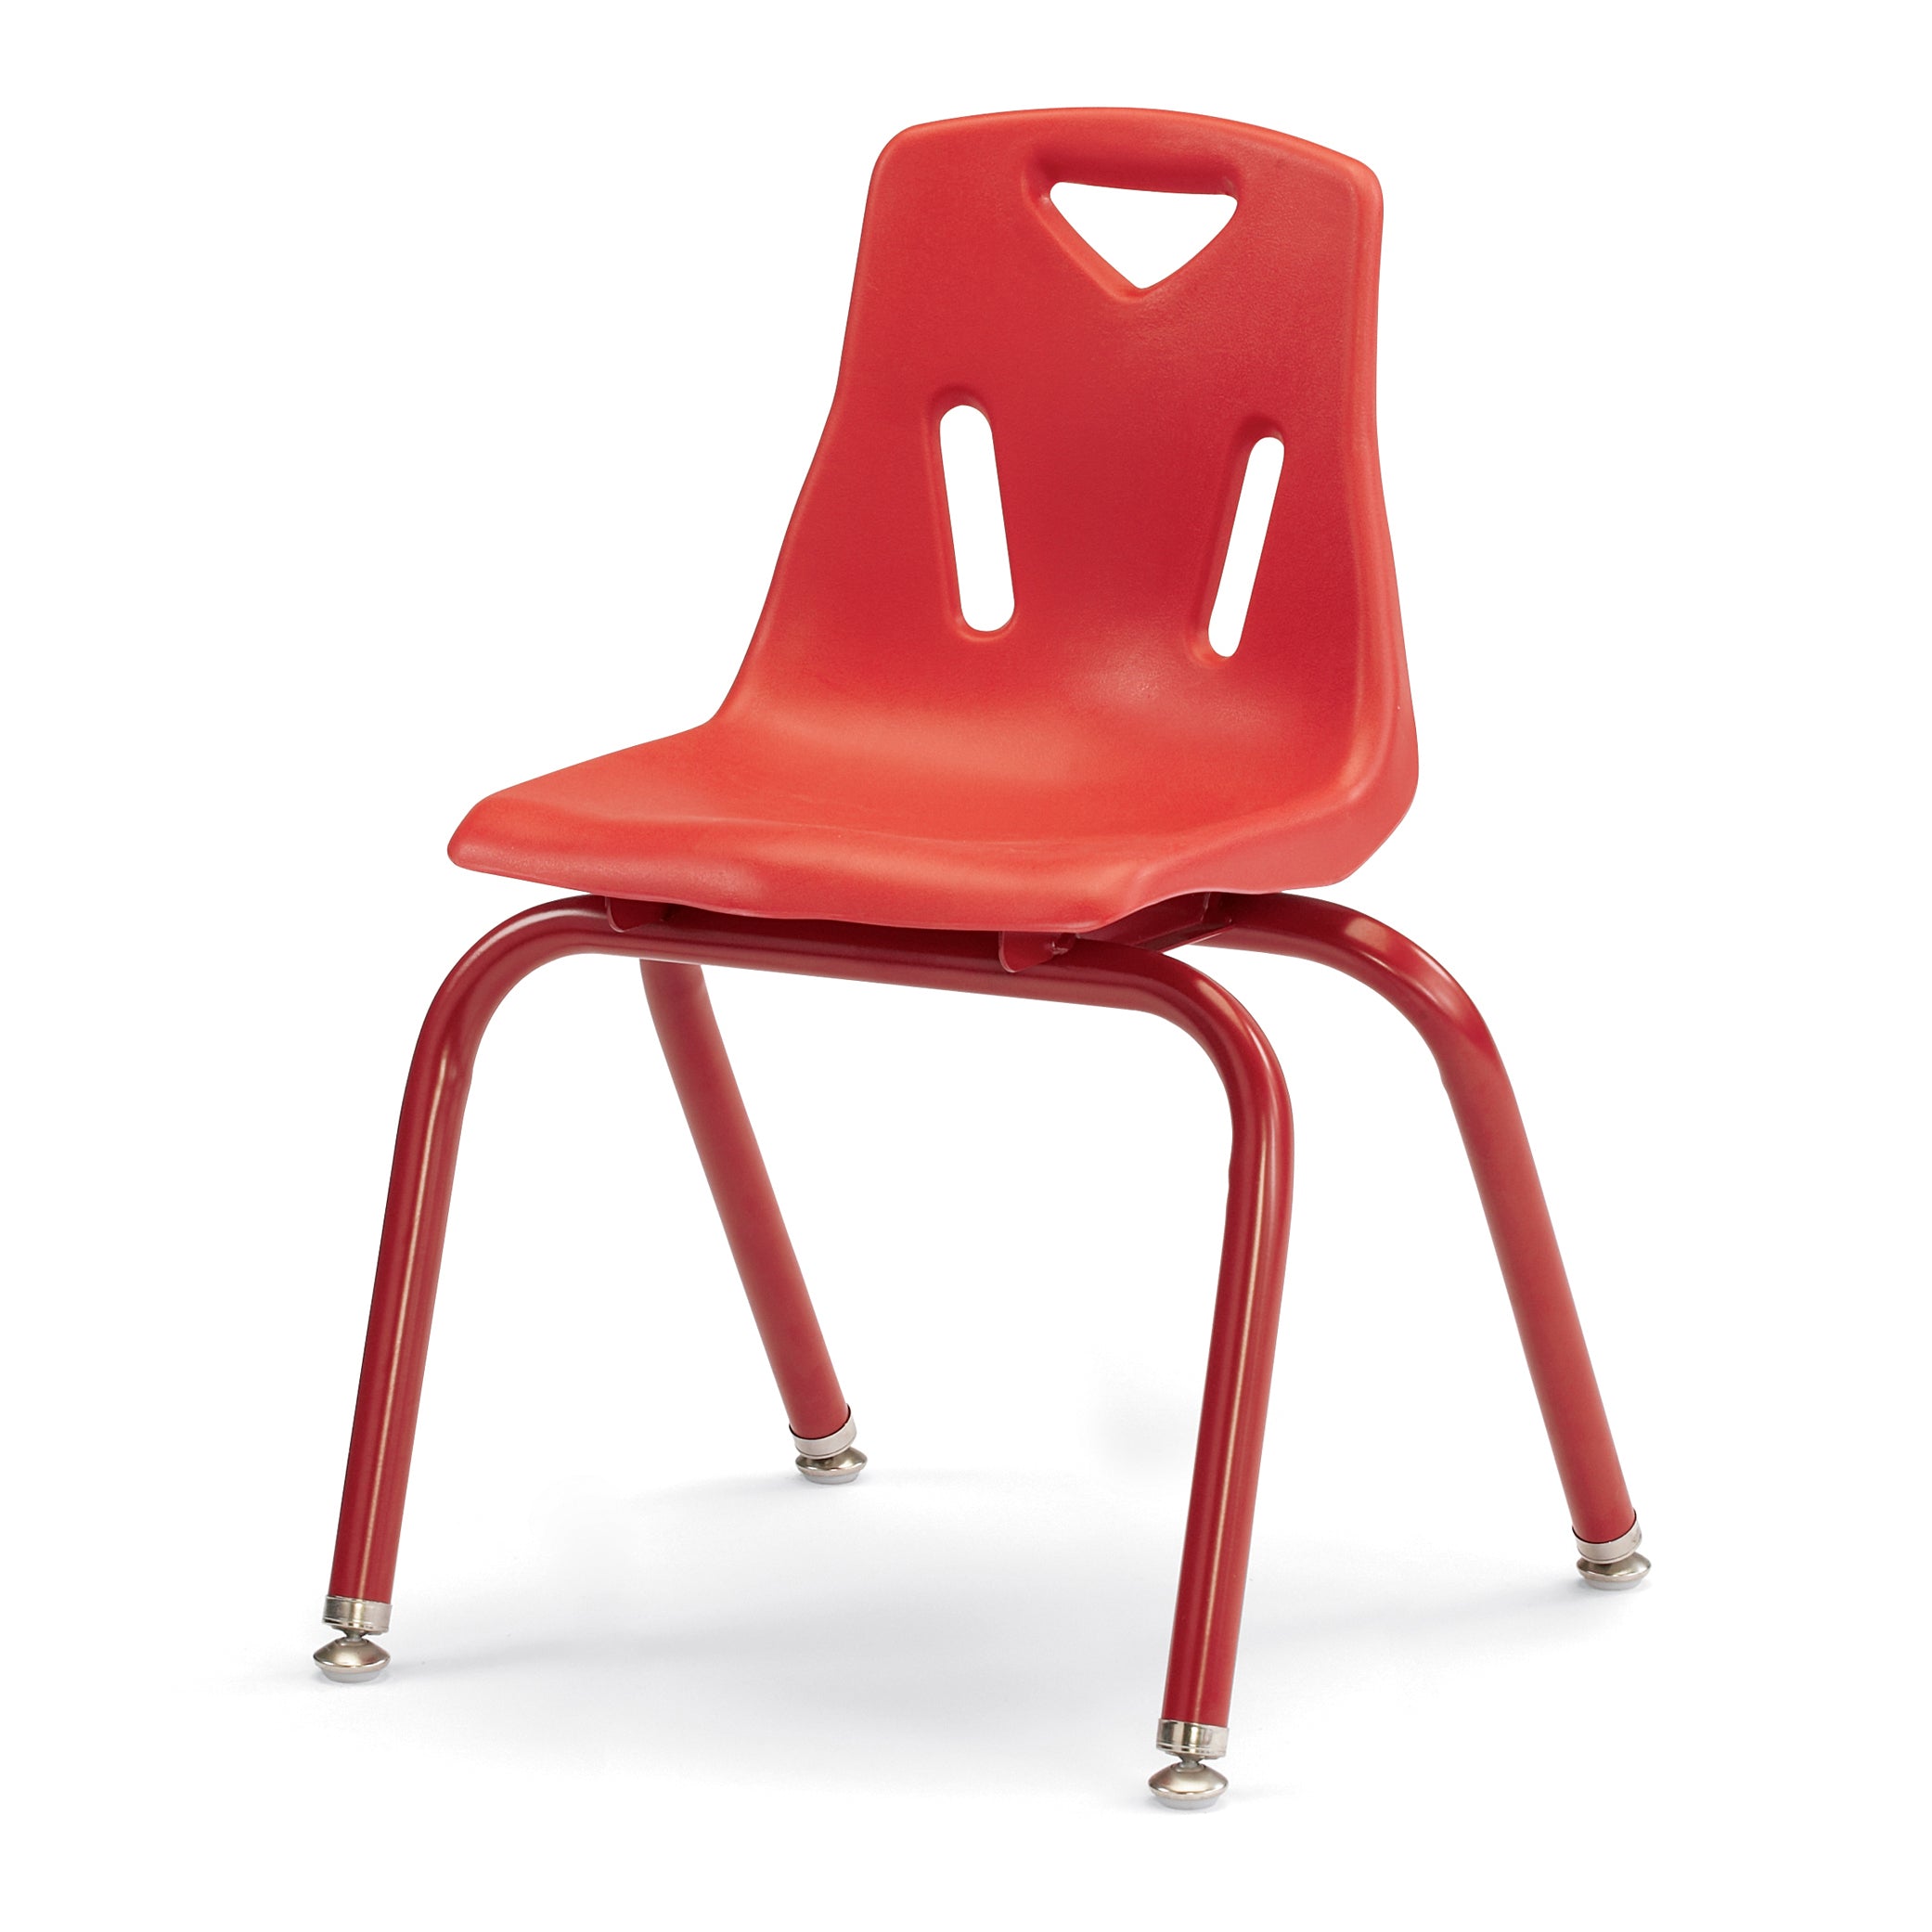 8124JC1008, Berries Stacking Chair with Powder-Coated Legs - 14" Ht - Red